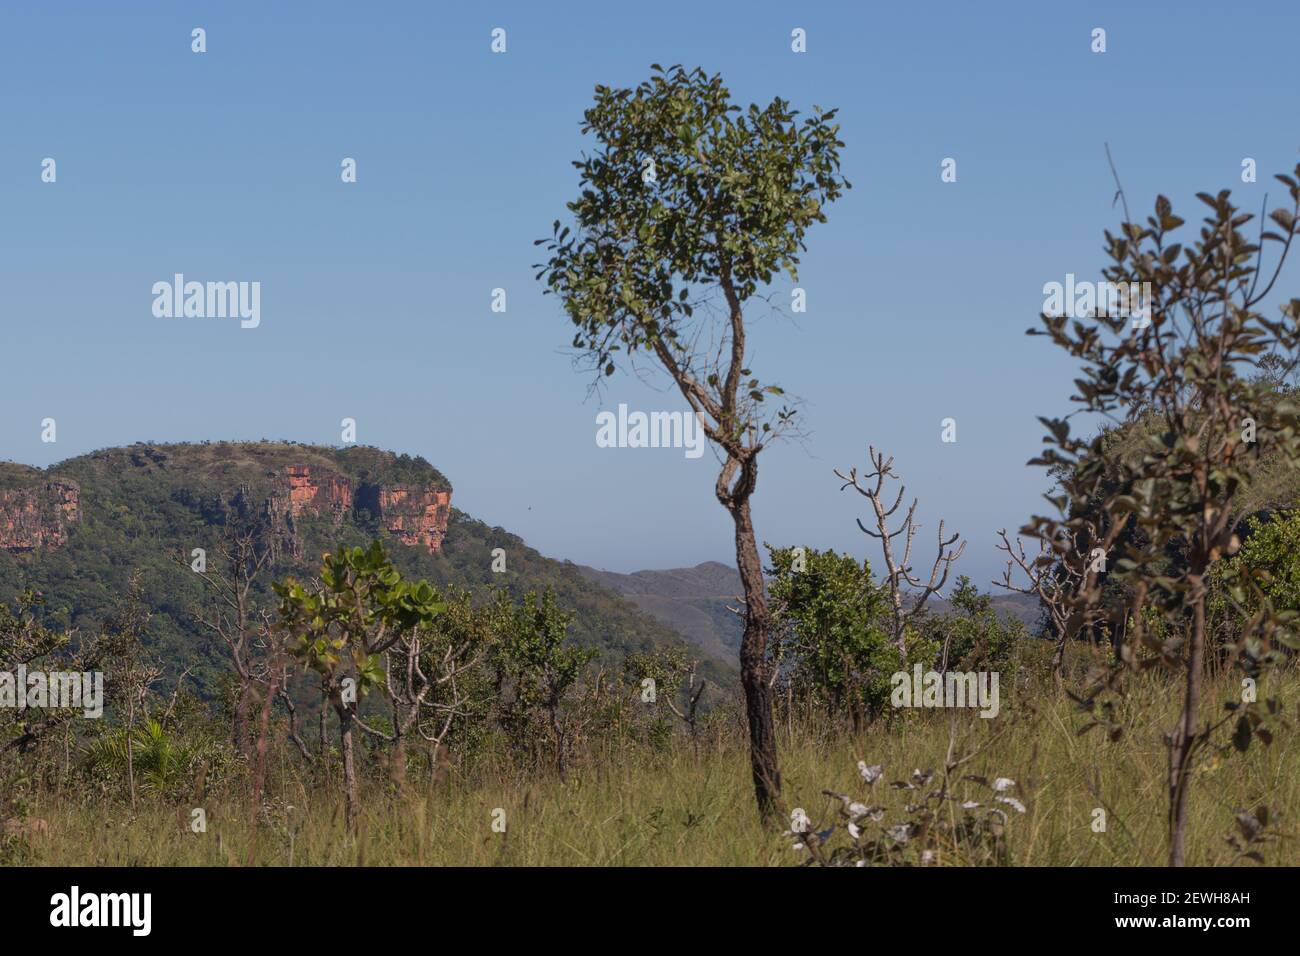 Tree in front of blue sky and some plateus in the Chapada dos Guimaraes Nationalpark in Mato Grosso, Brazil Stock Photo